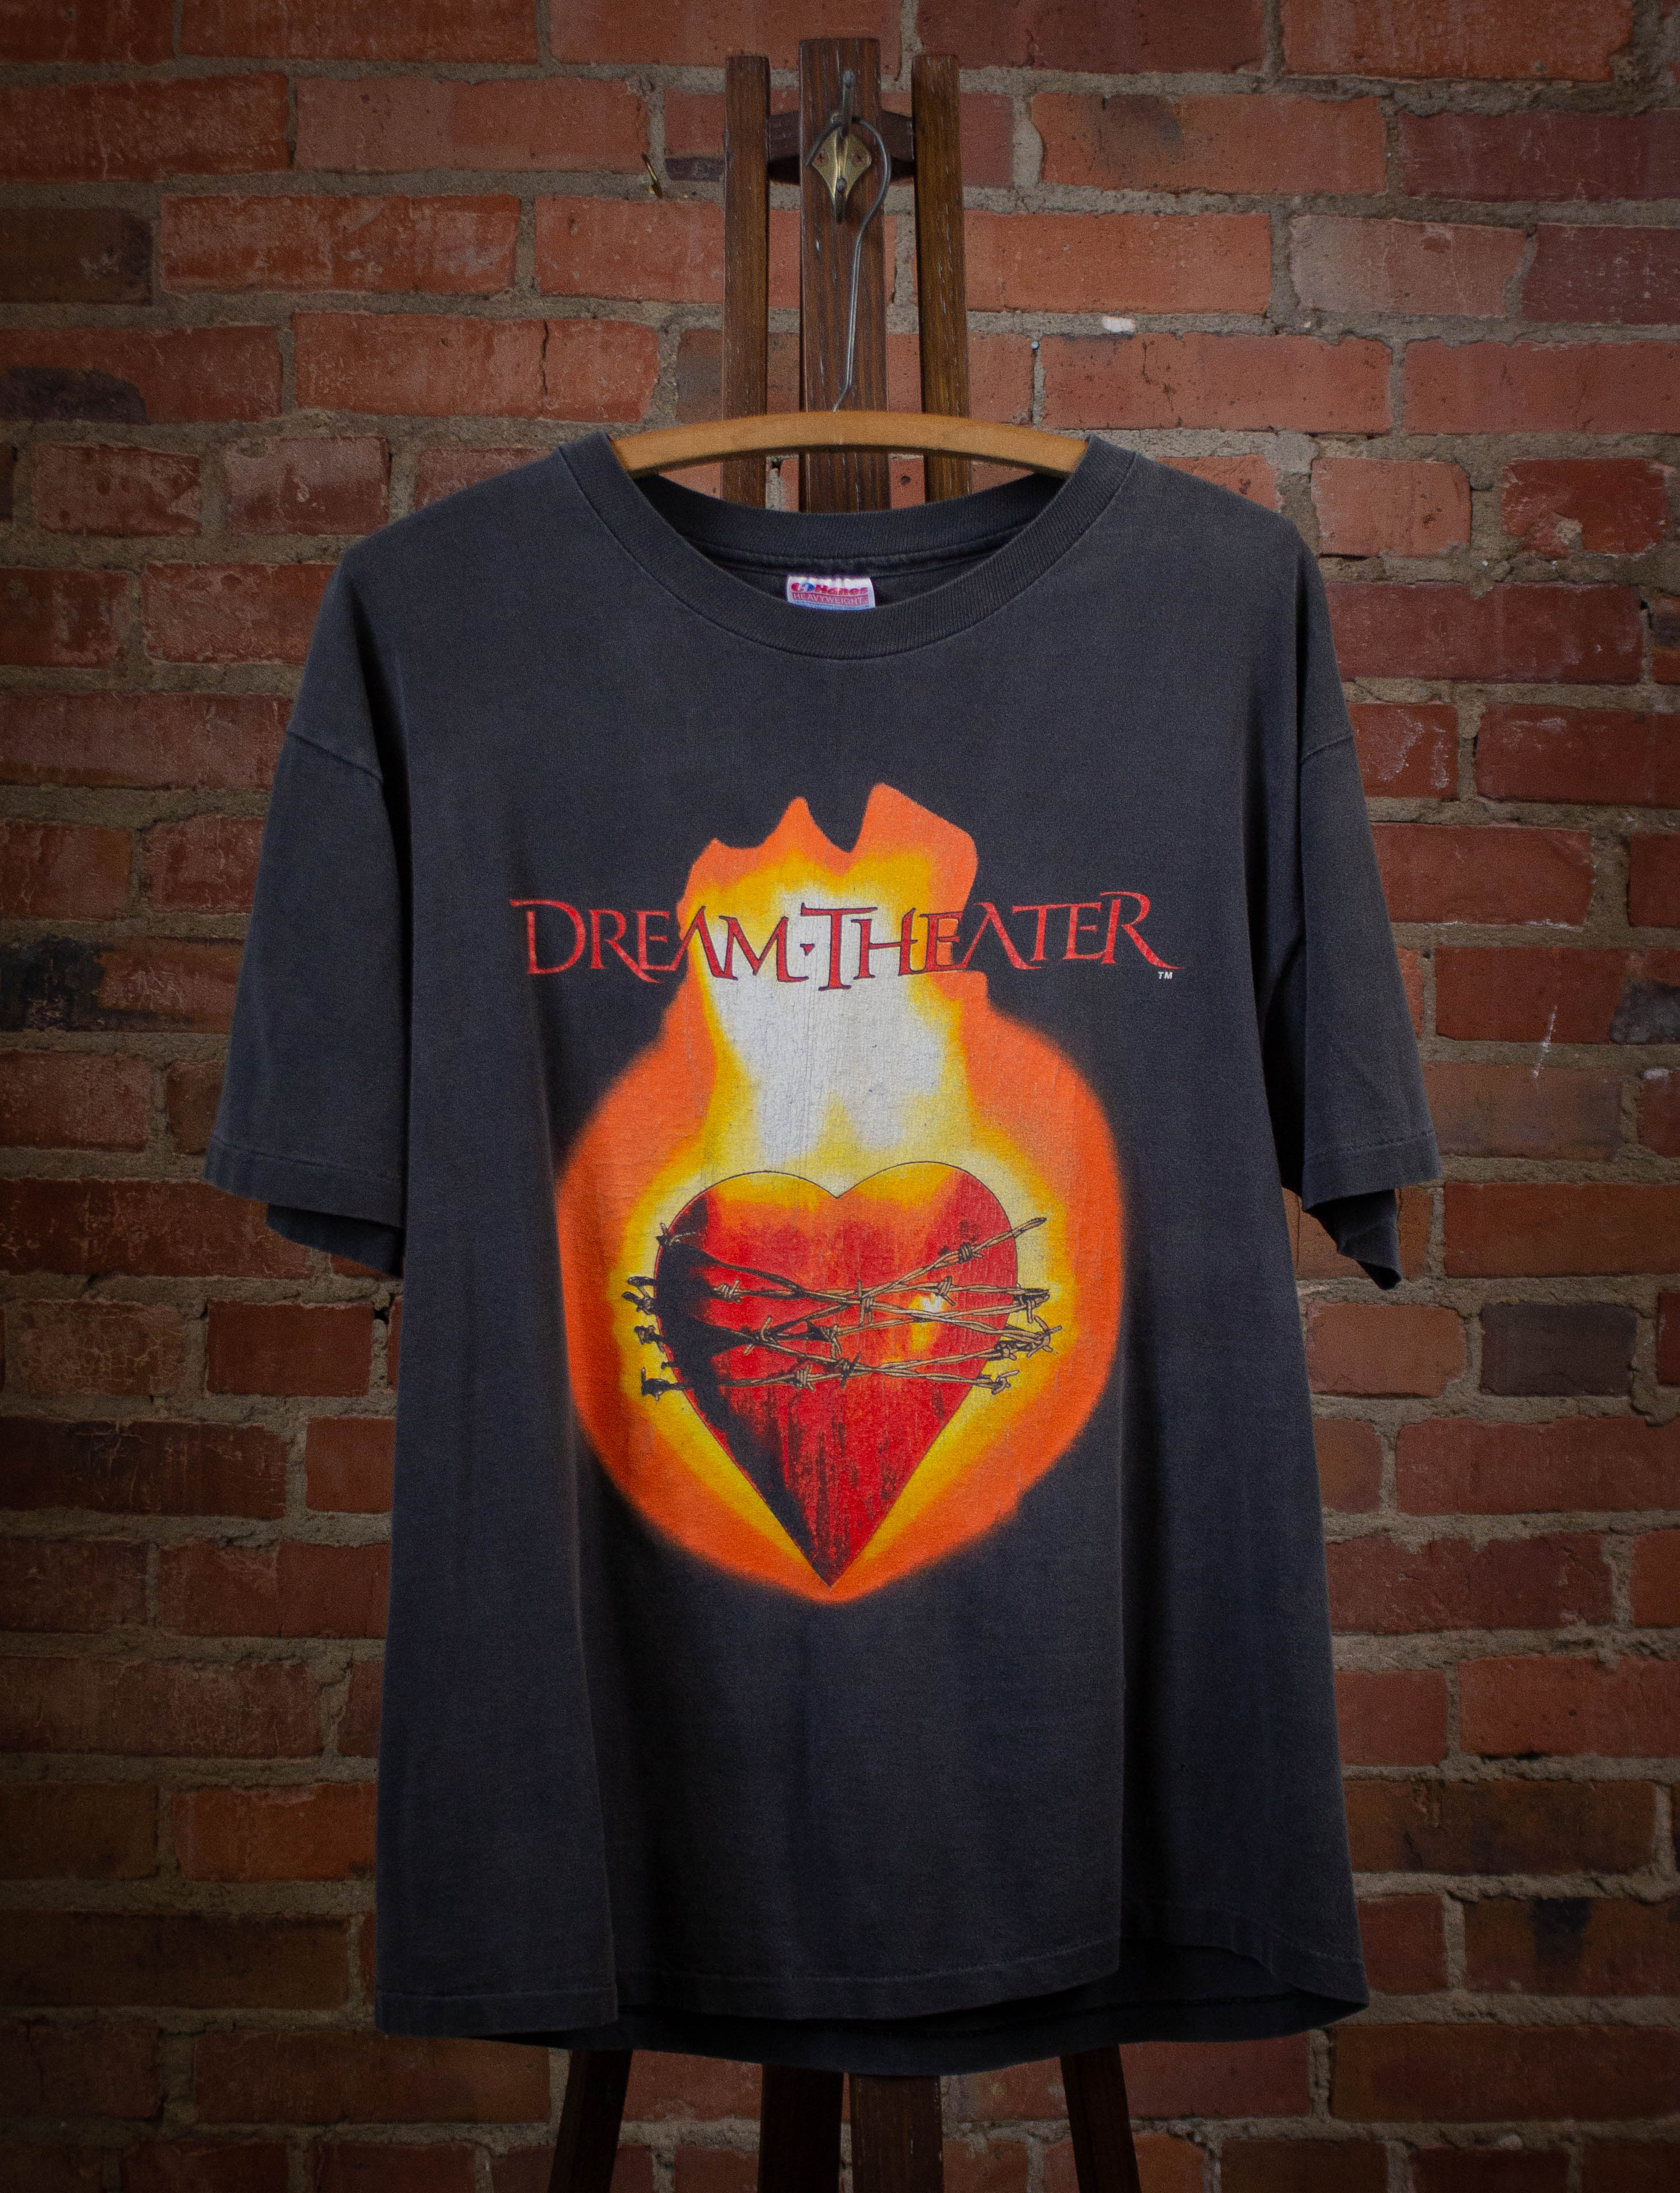 Vintage Dream Theater Images and Words Concert T Shirt 1992 Black Large